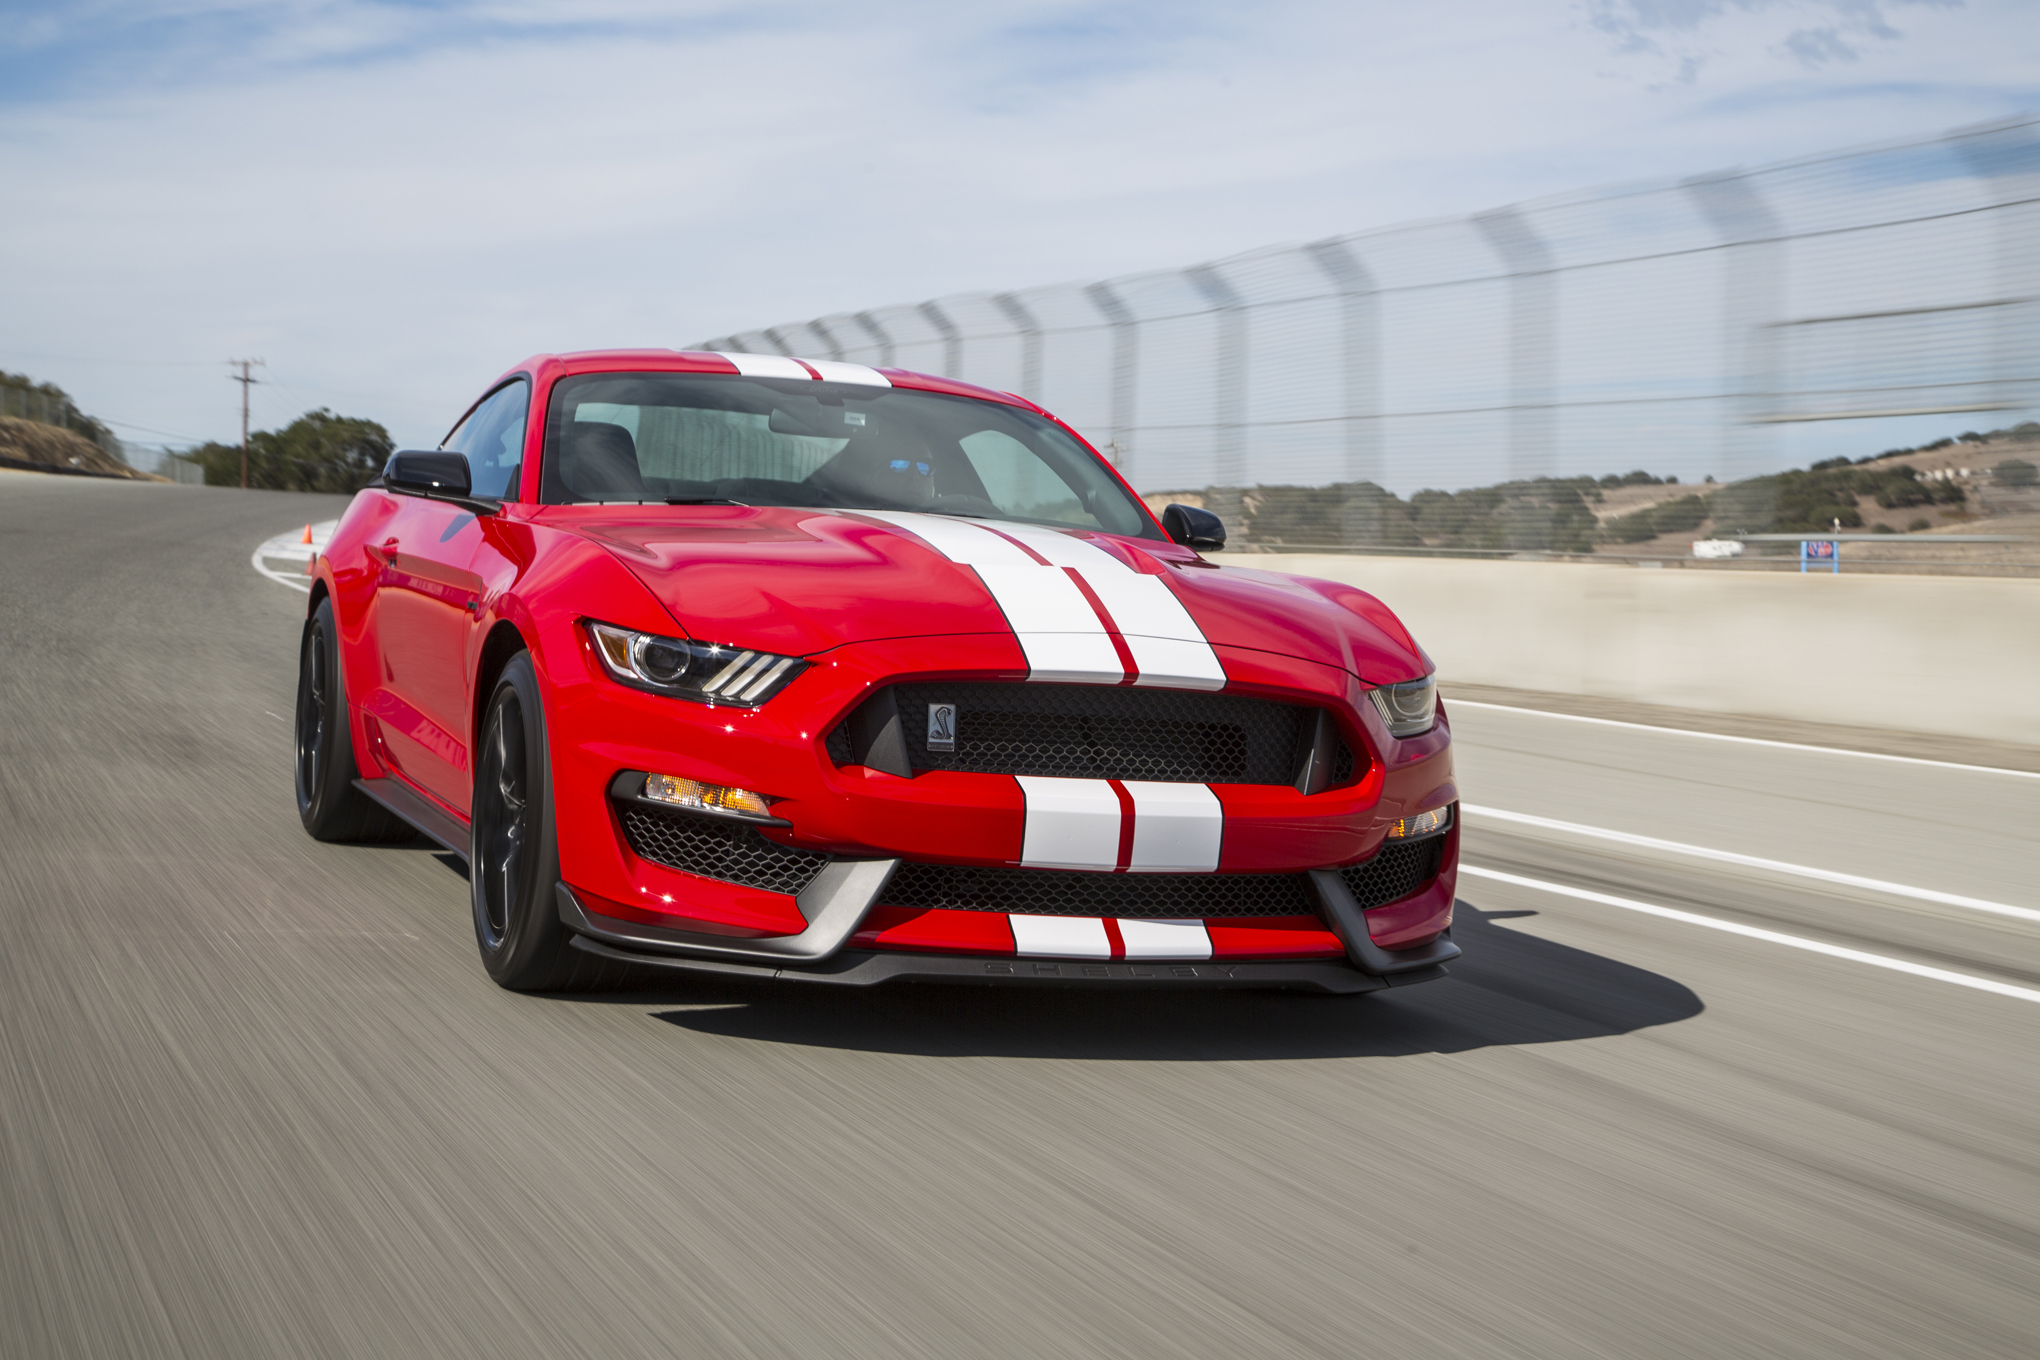 2016 Ford Shelby GT350 Mustang front three quarter in motion - Shelby  Mustang GT350 Photo (40106716) - Fanpop